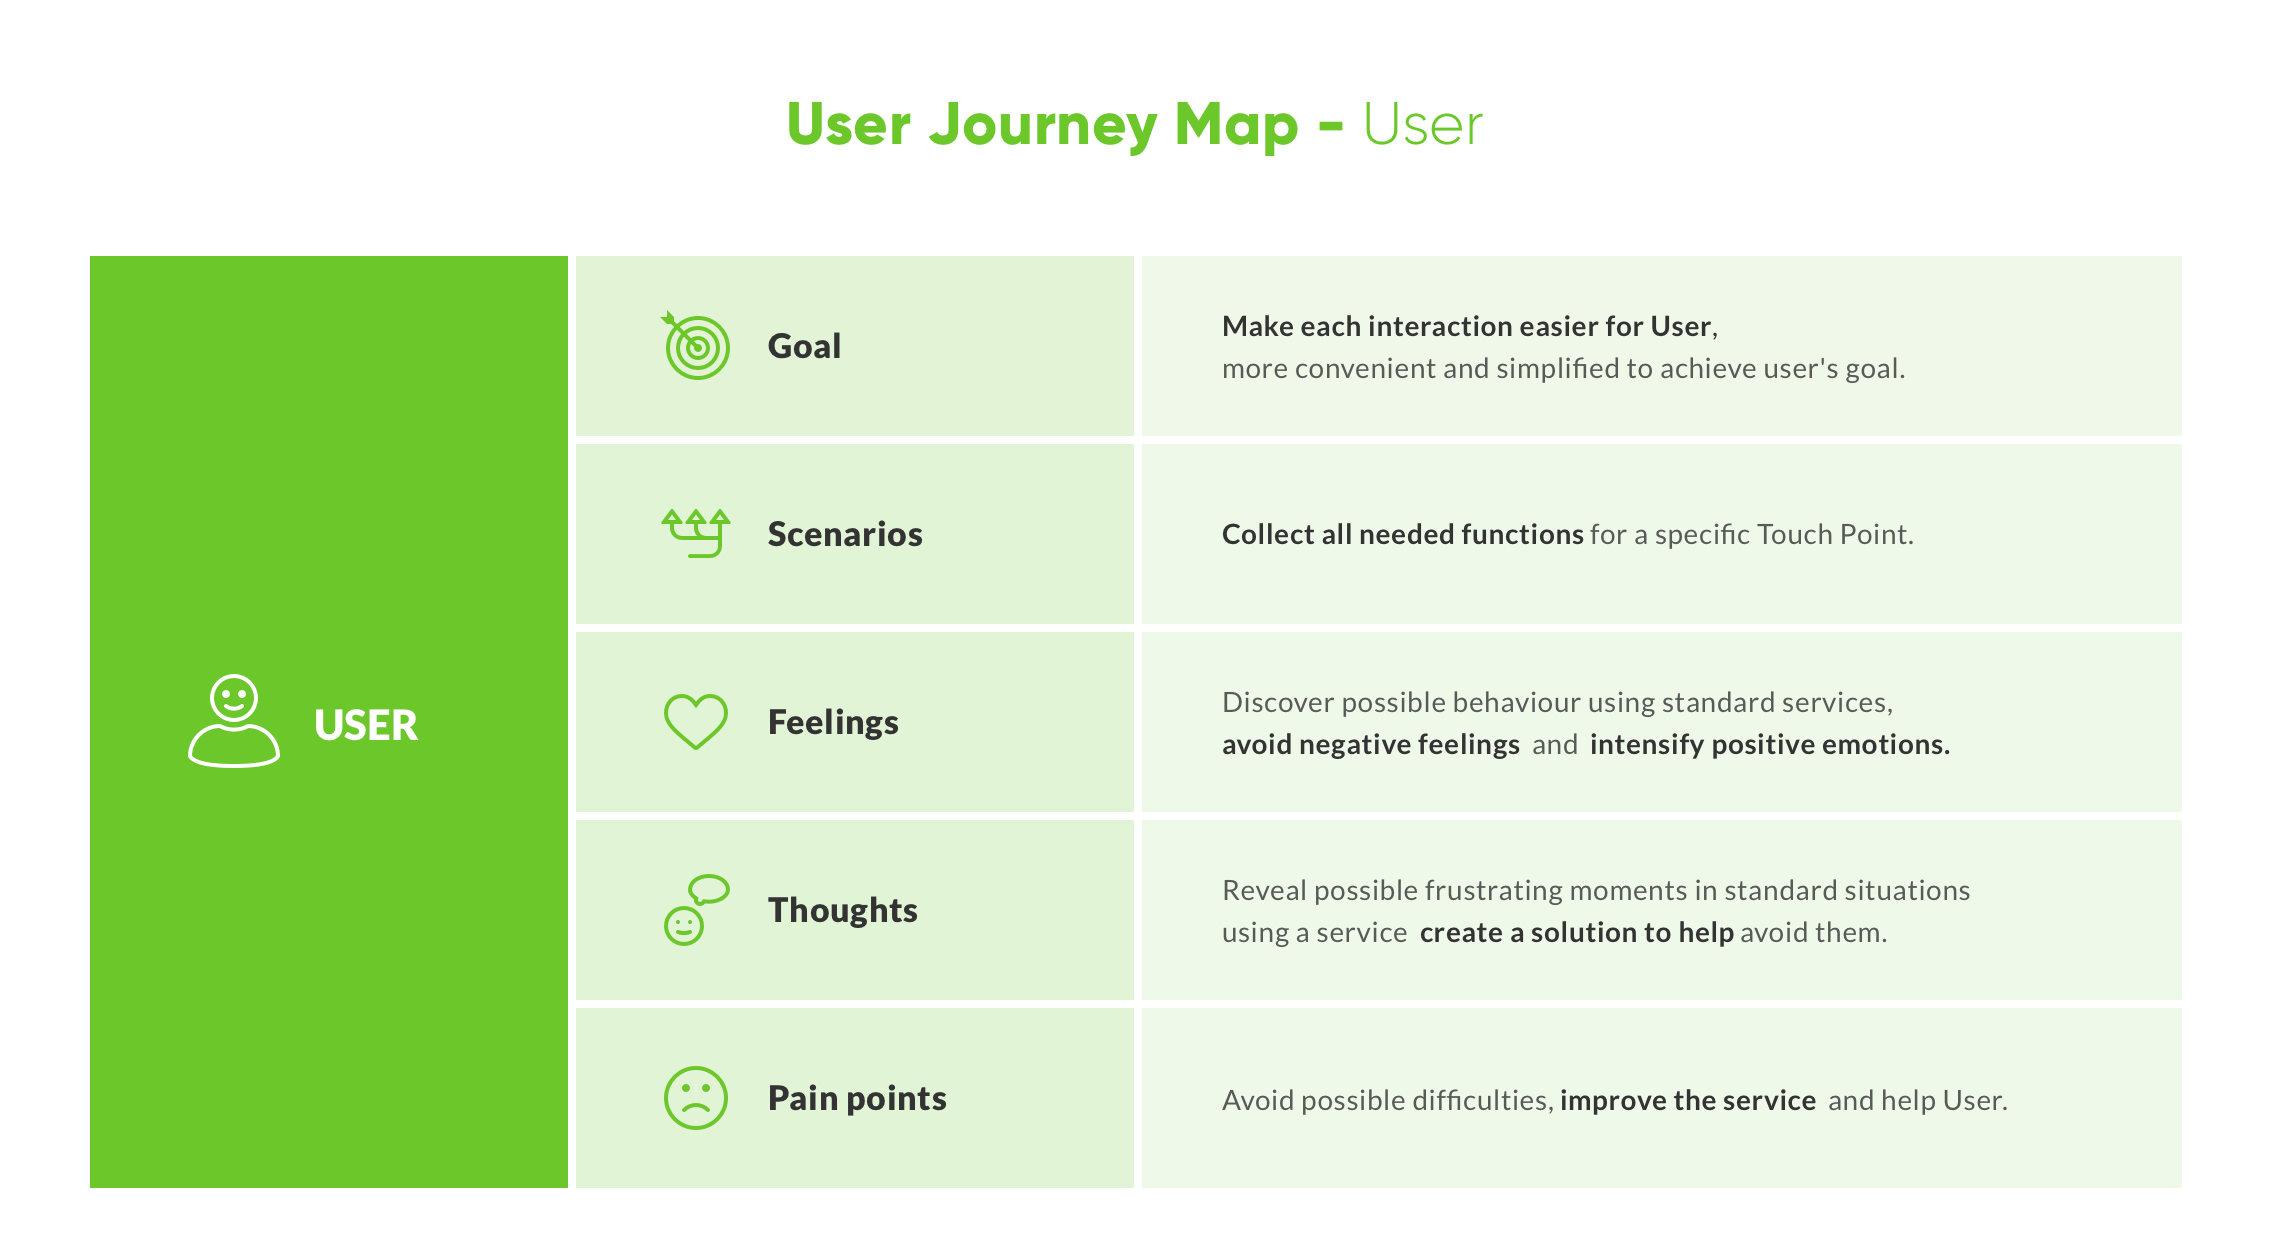 Core Banking Case Study: Digital Transformation in Financial Services - User Journey Map